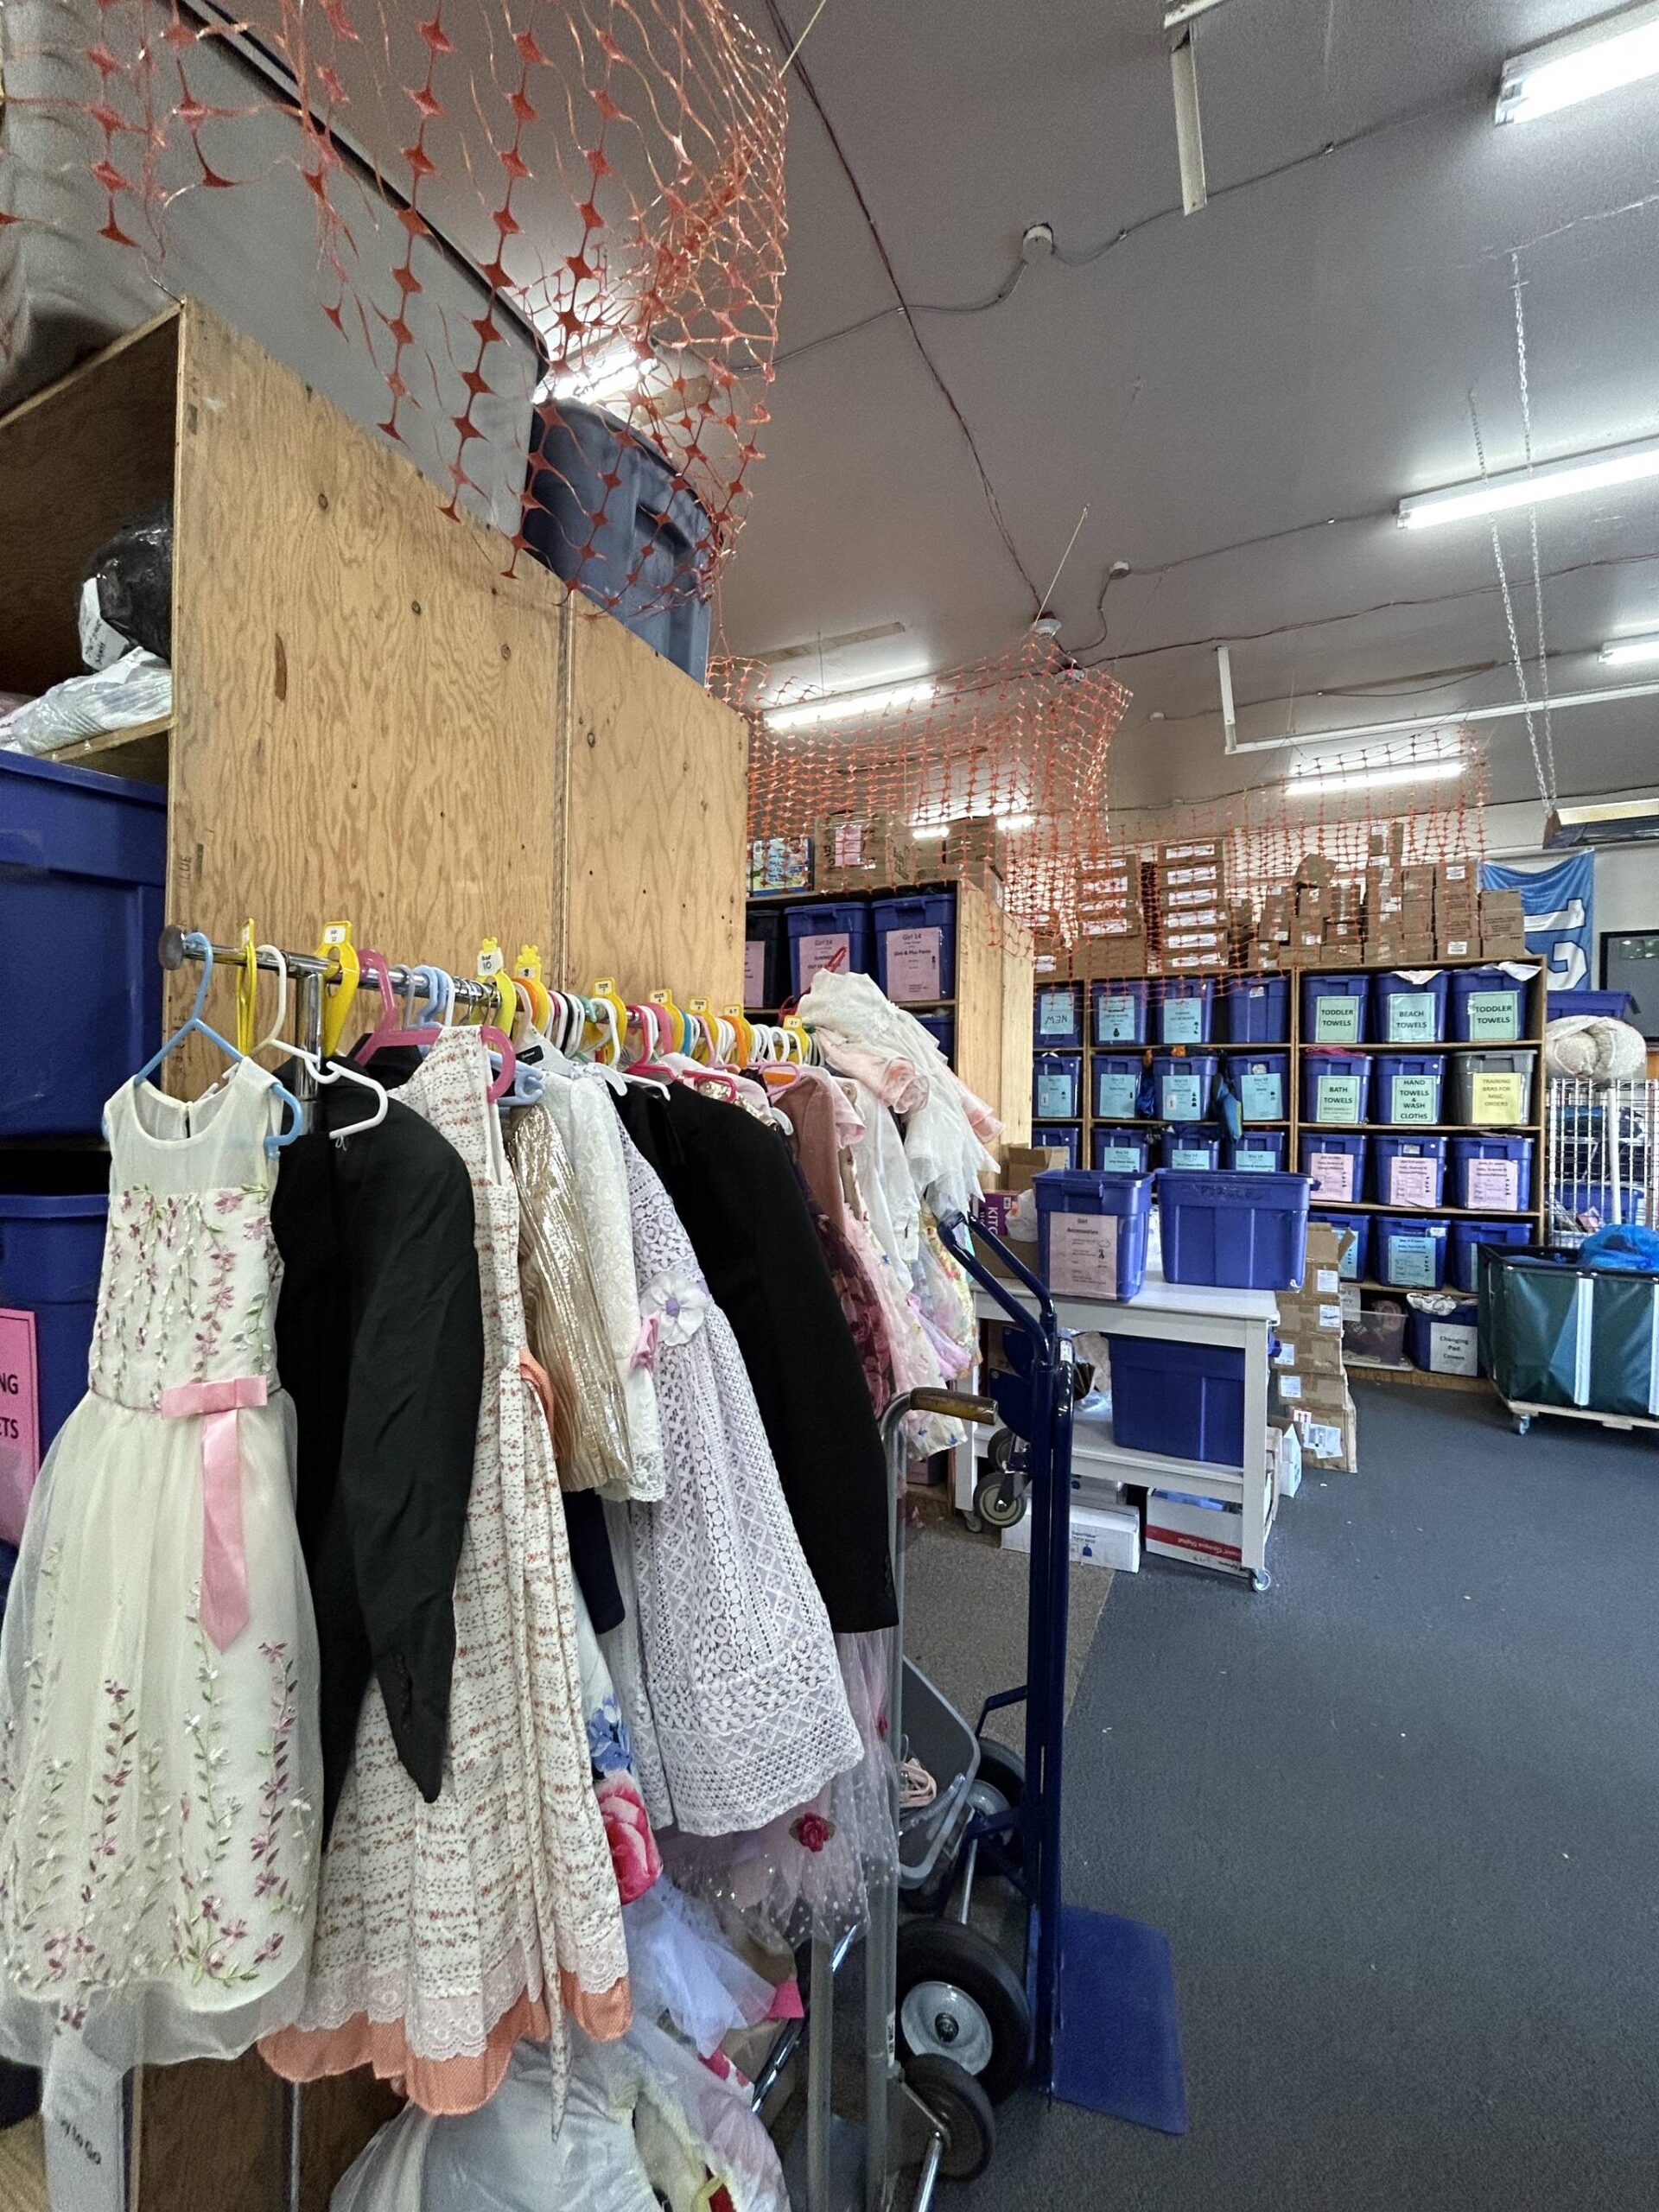 When partner agencies pick up the bundles, they can stop and shop at this rack with formal clothing if they know a child is going to an event. (Photo by Cameron Sires)